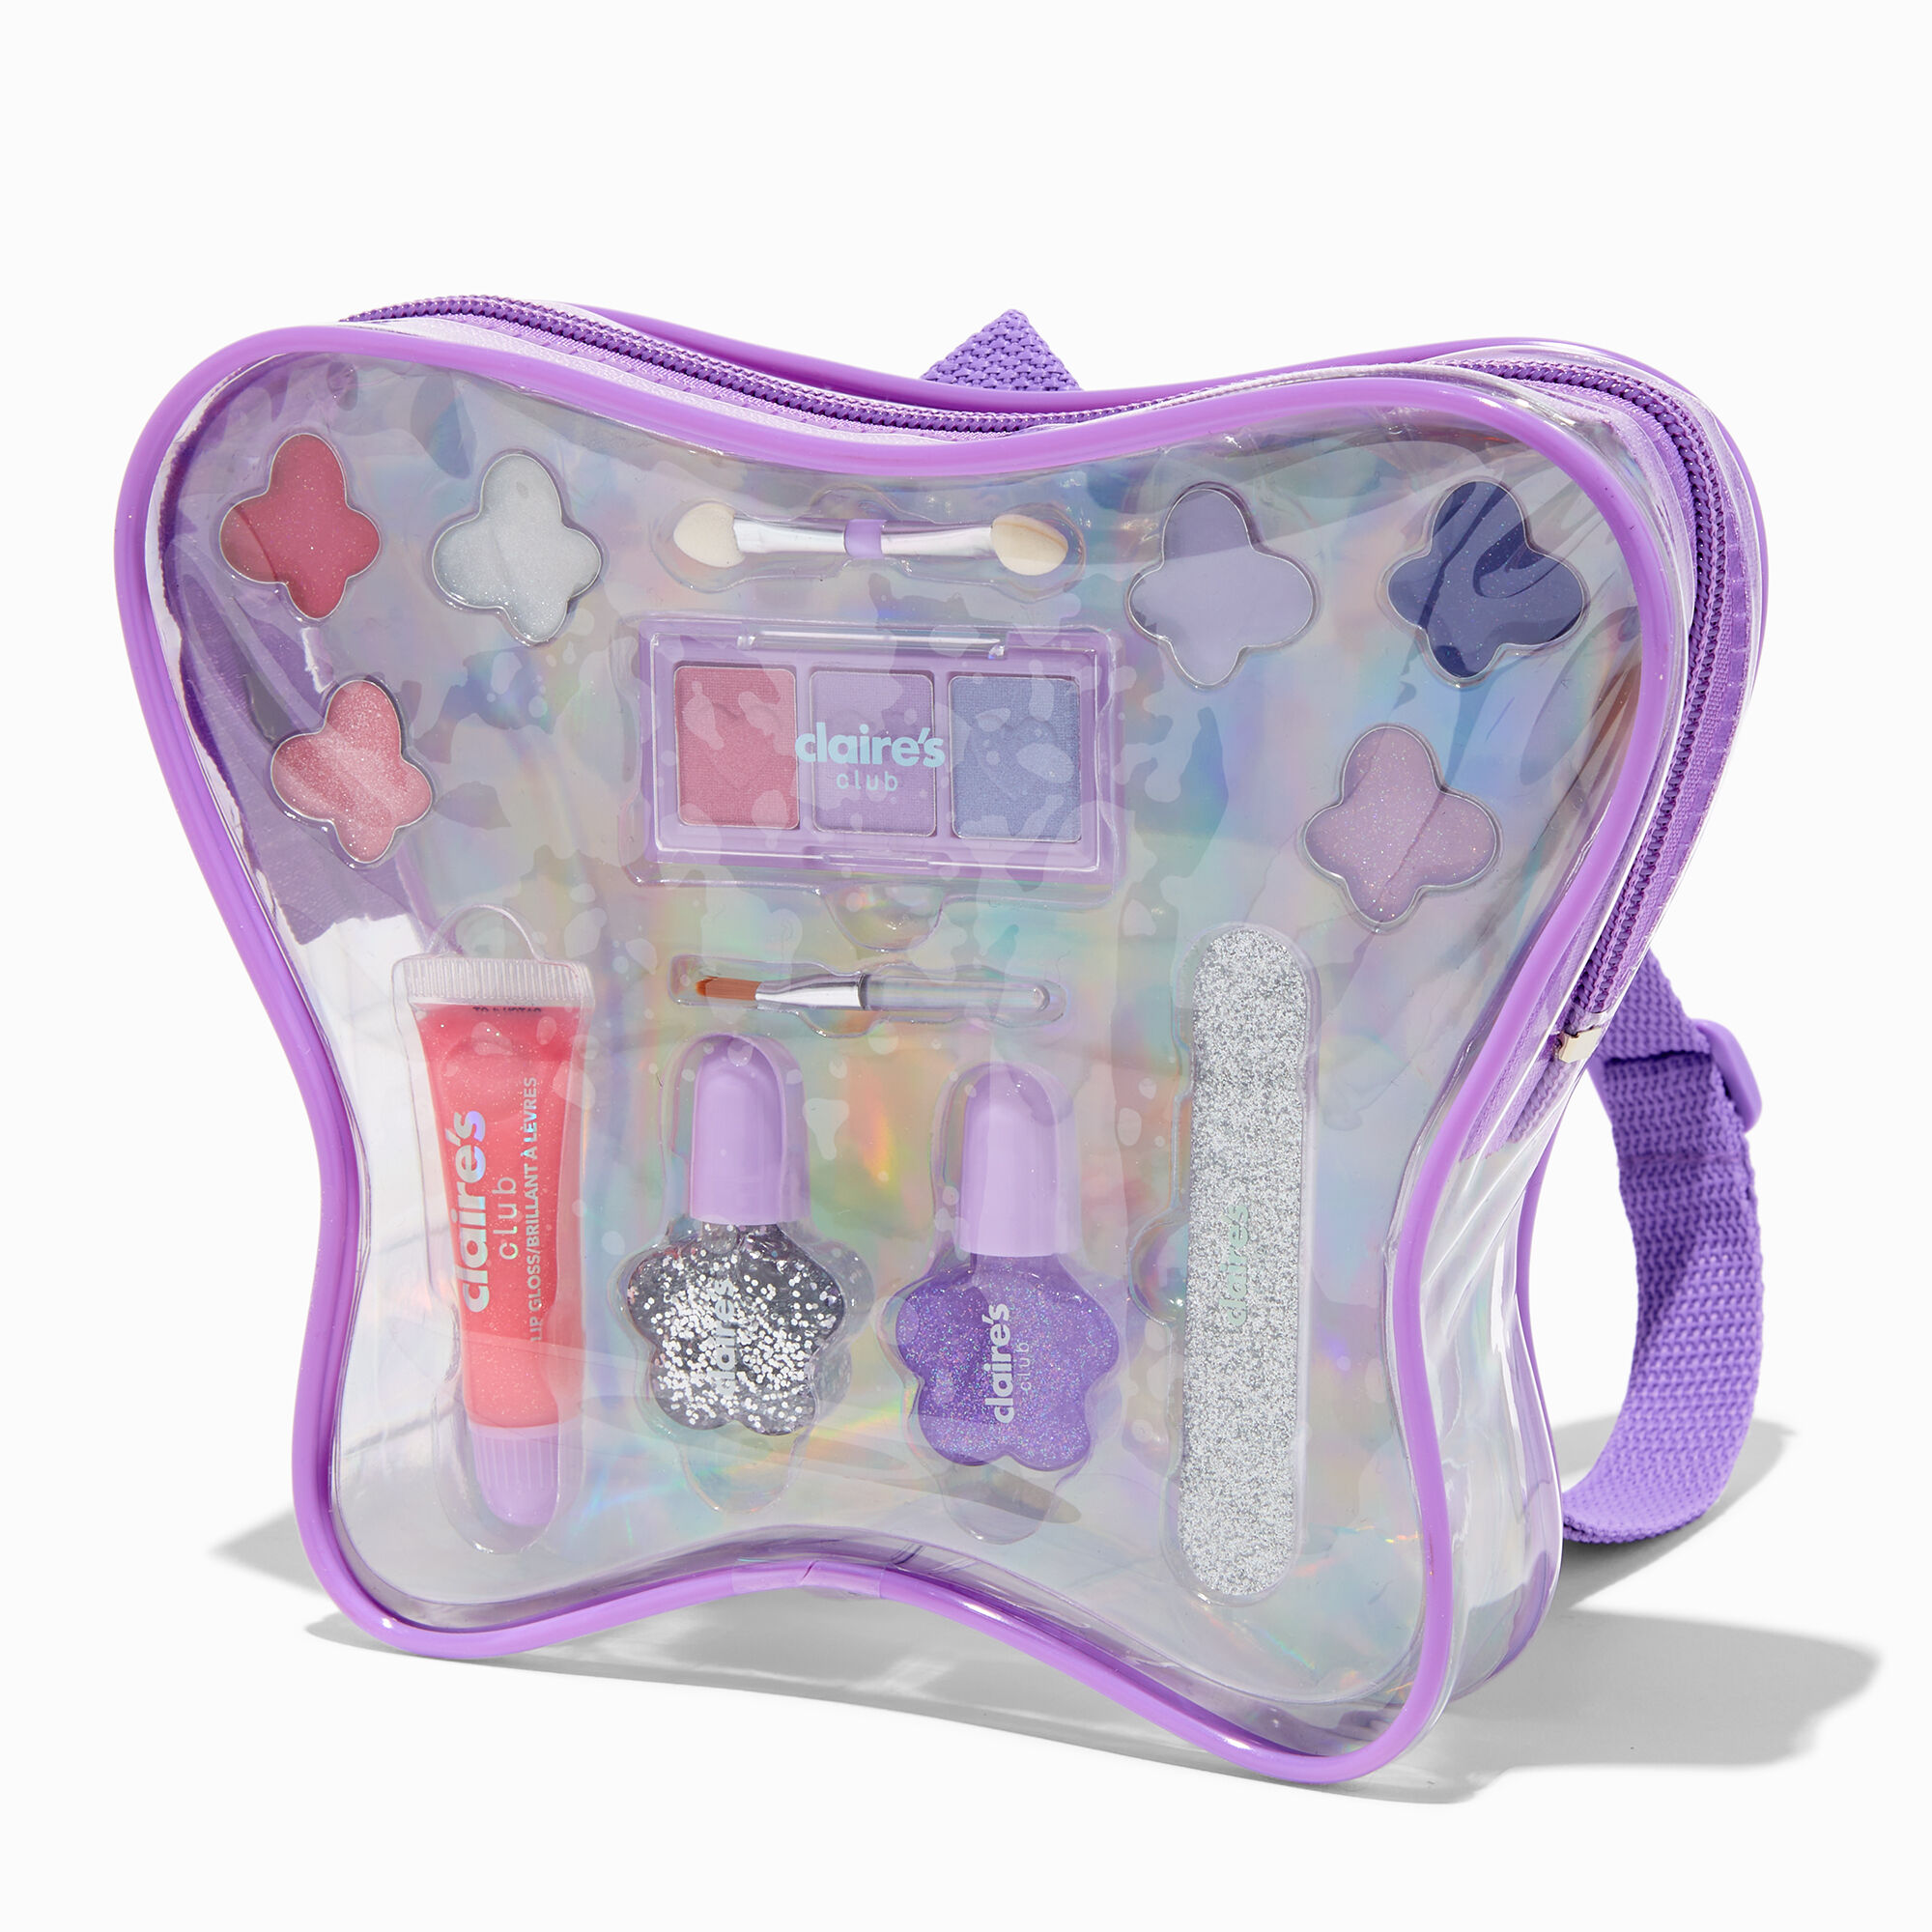 View Claires Club Butterfly Backpack Makeup Set Purple information